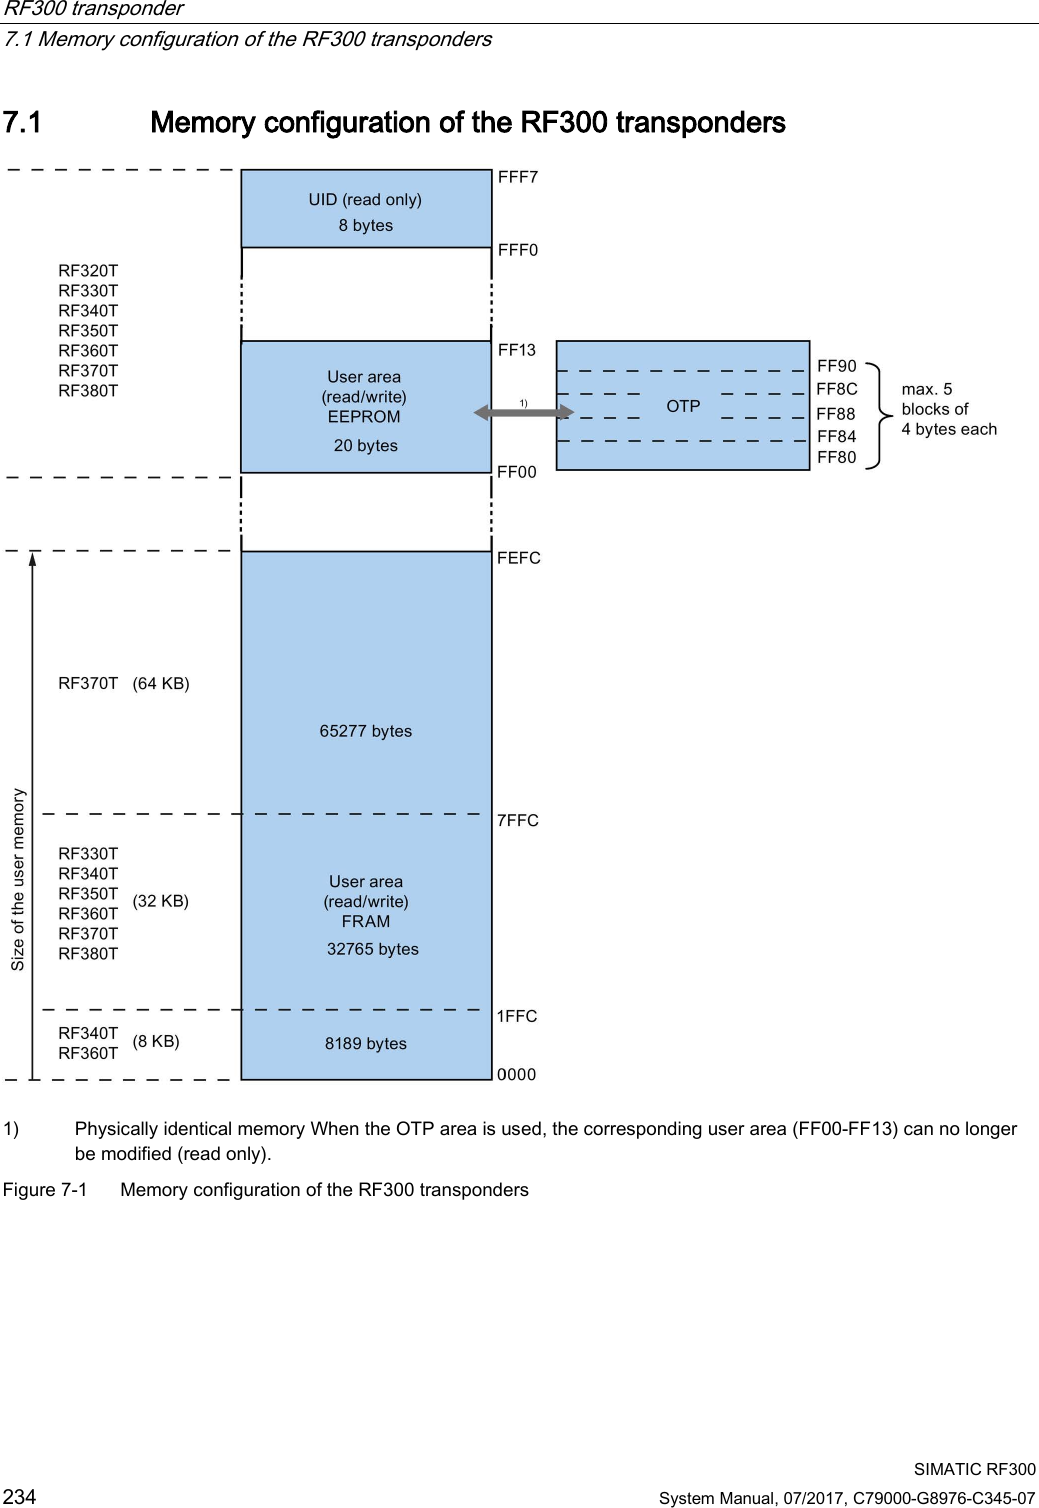 RF300 transponder   7.1 Memory configuration of the RF300 transponders  SIMATIC RF300 234 System Manual, 07/2017, C79000-G8976-C345-07 7.1 Memory configuration of the RF300 transponders  1) Physically identical memory When the OTP area is used, the corresponding user area (FF00-FF13) can no longer be modified (read only). Figure 7-1  Memory configuration of the RF300 transponders  